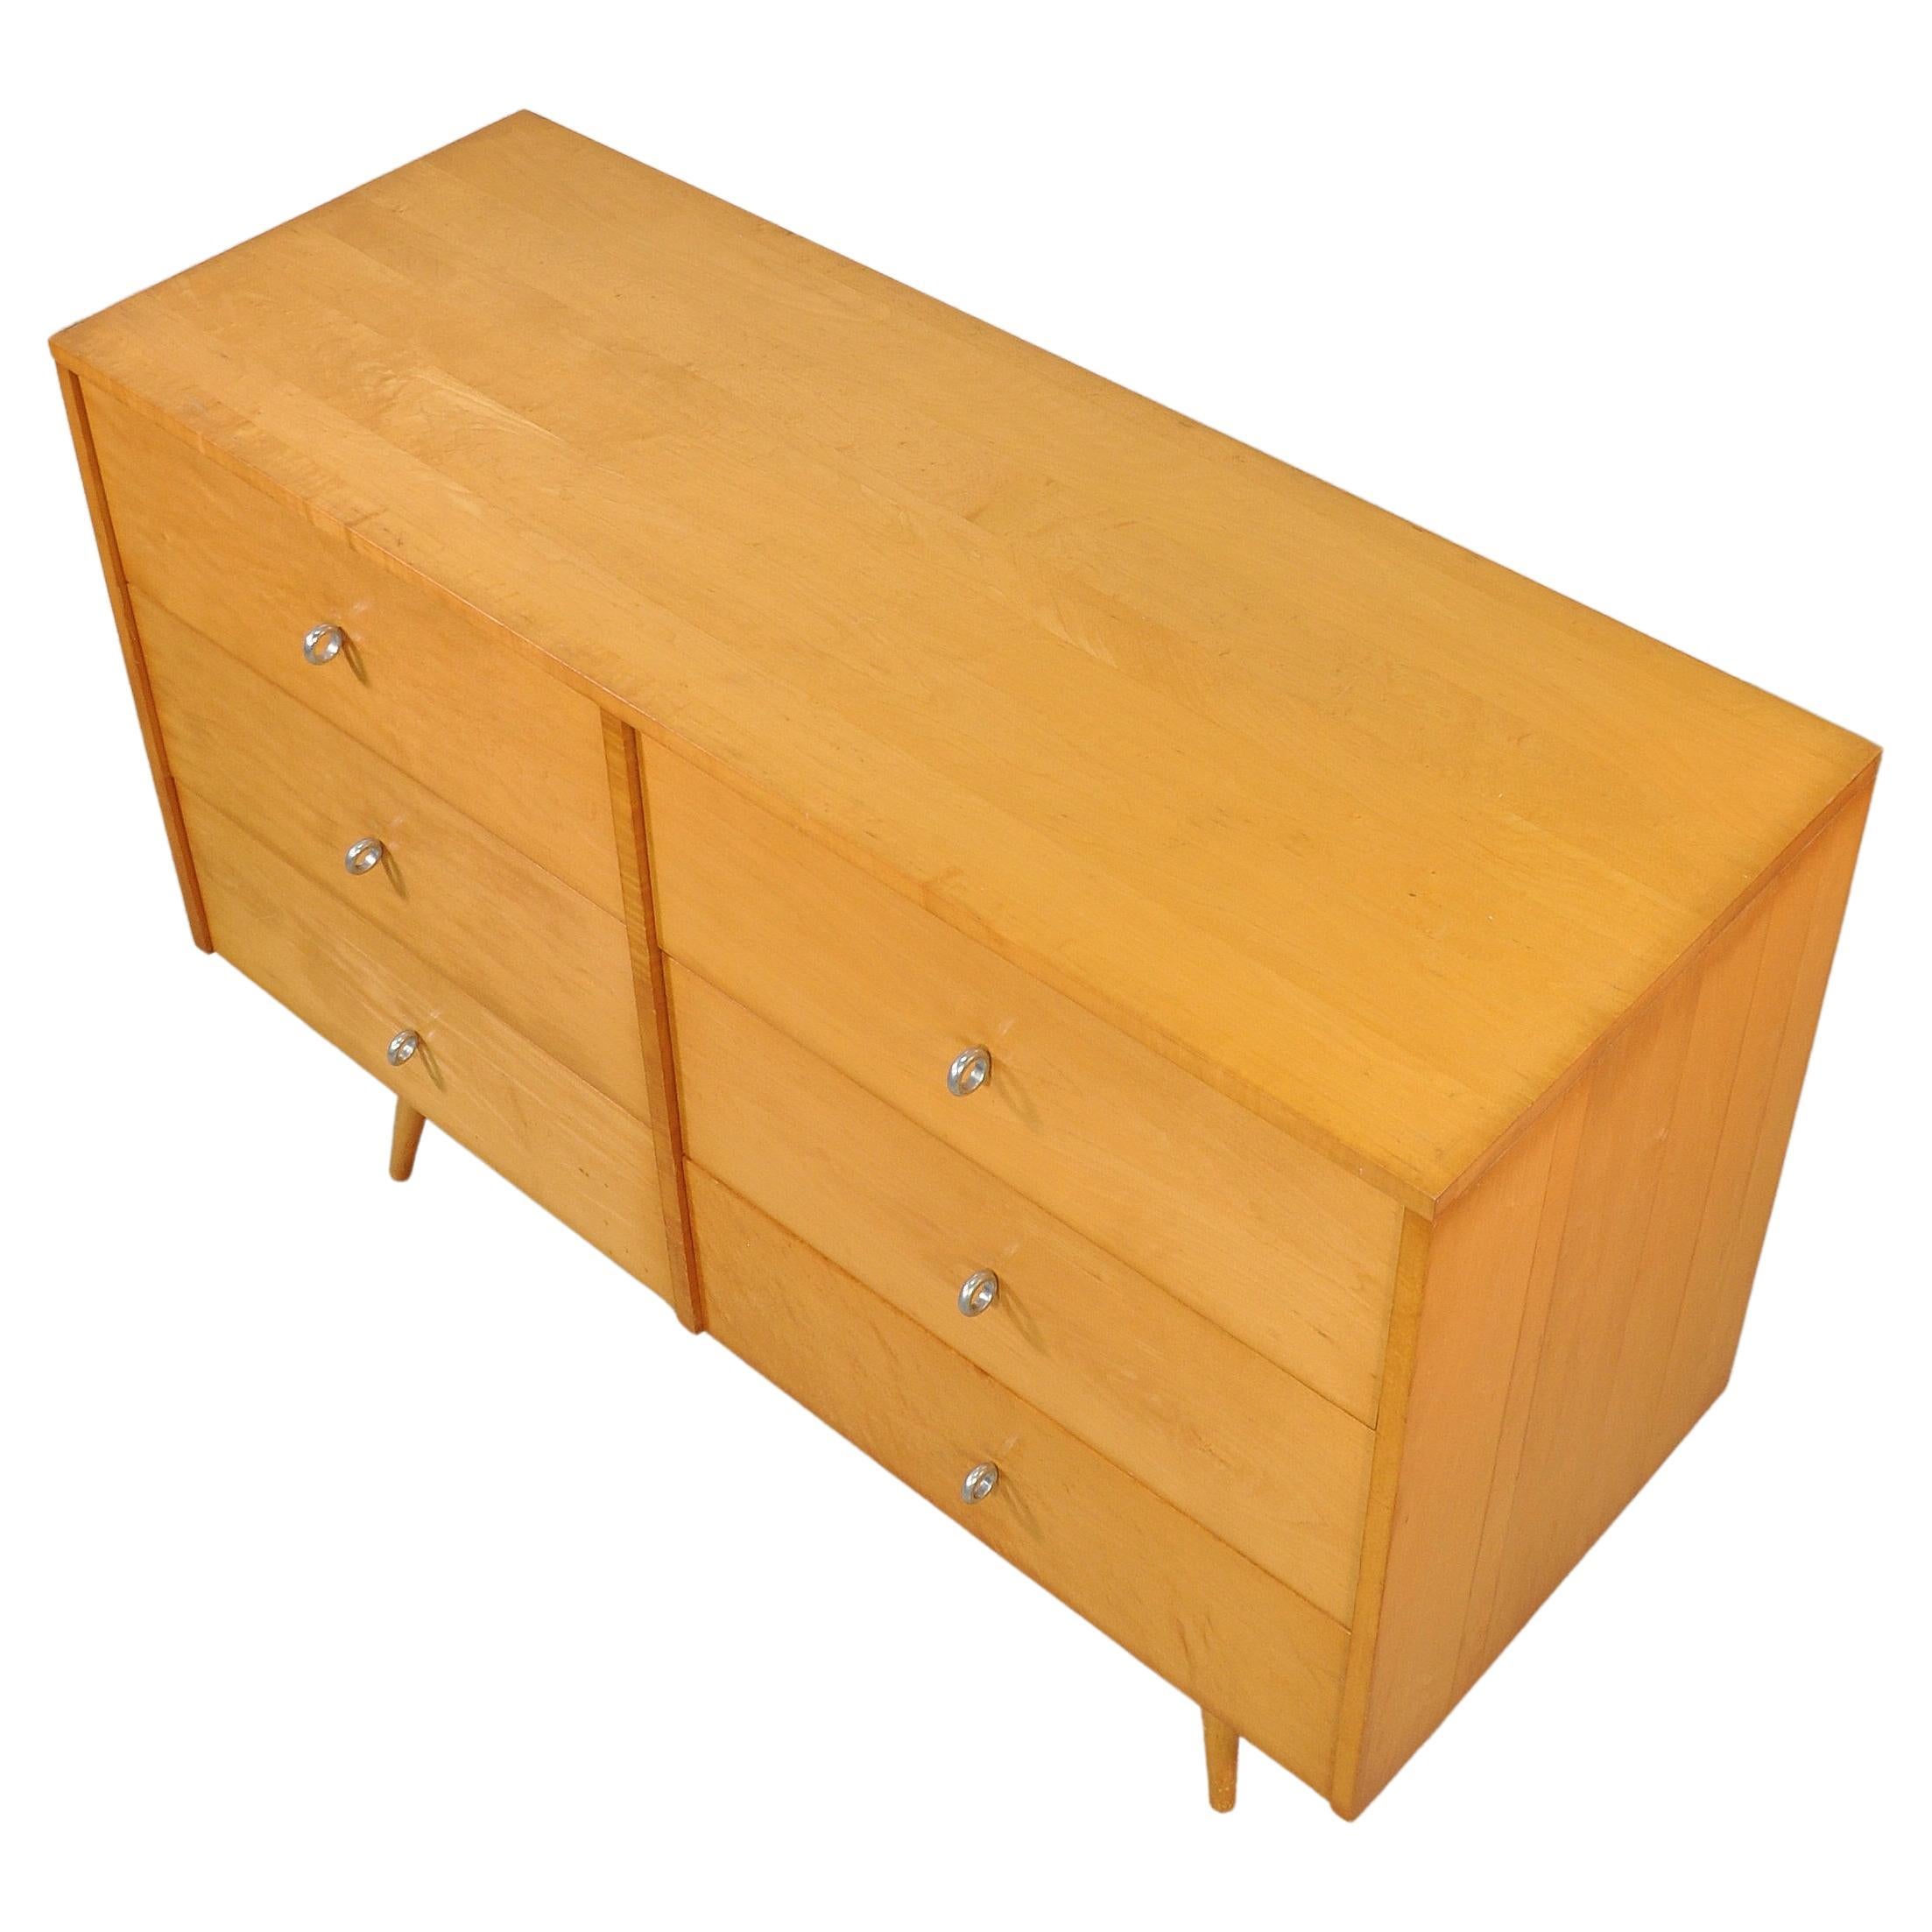 American Paul McCobb Maple Double Dresser Planner Group by Winchendon Furniture, 1950s For Sale